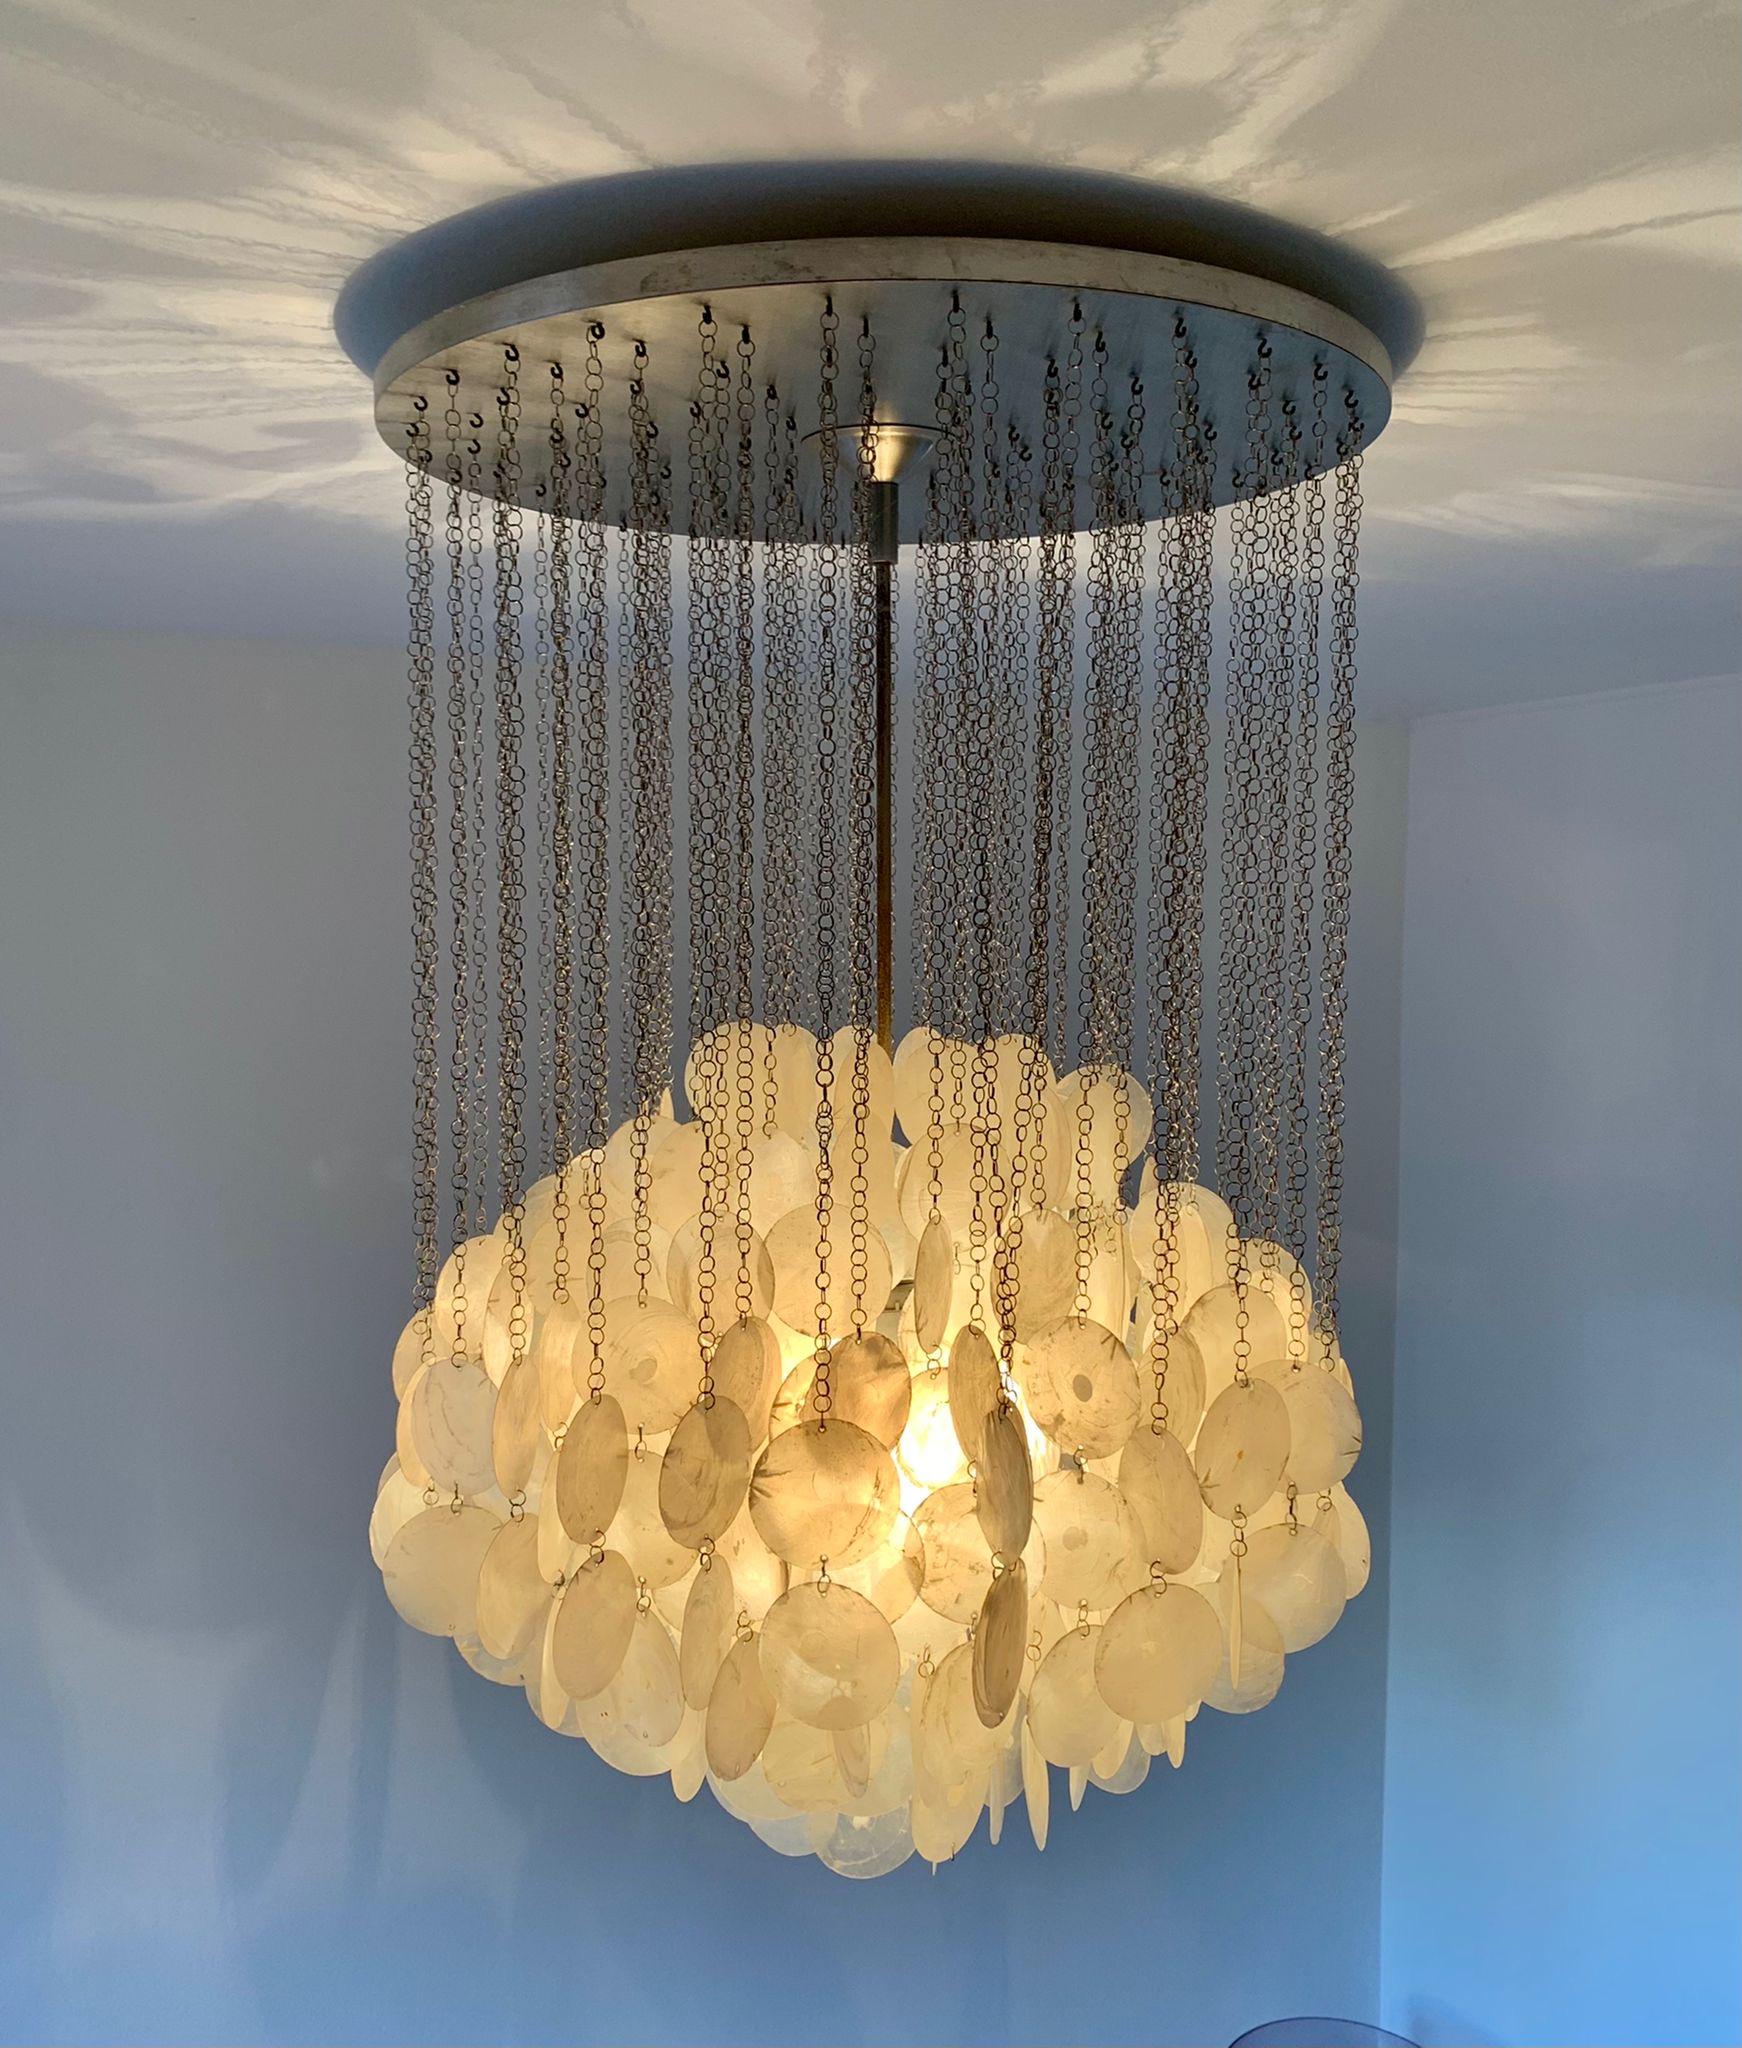 Chandelier by Verner Panton manufactured by J. Luber, denmark,  1960s 
chrome-plated steel chandelier with mother-of-pearl decoration by Verner Panton produced by J. Luber in the 1970s

Good condition, slight wear from time. 

Measurements : 55 x 90